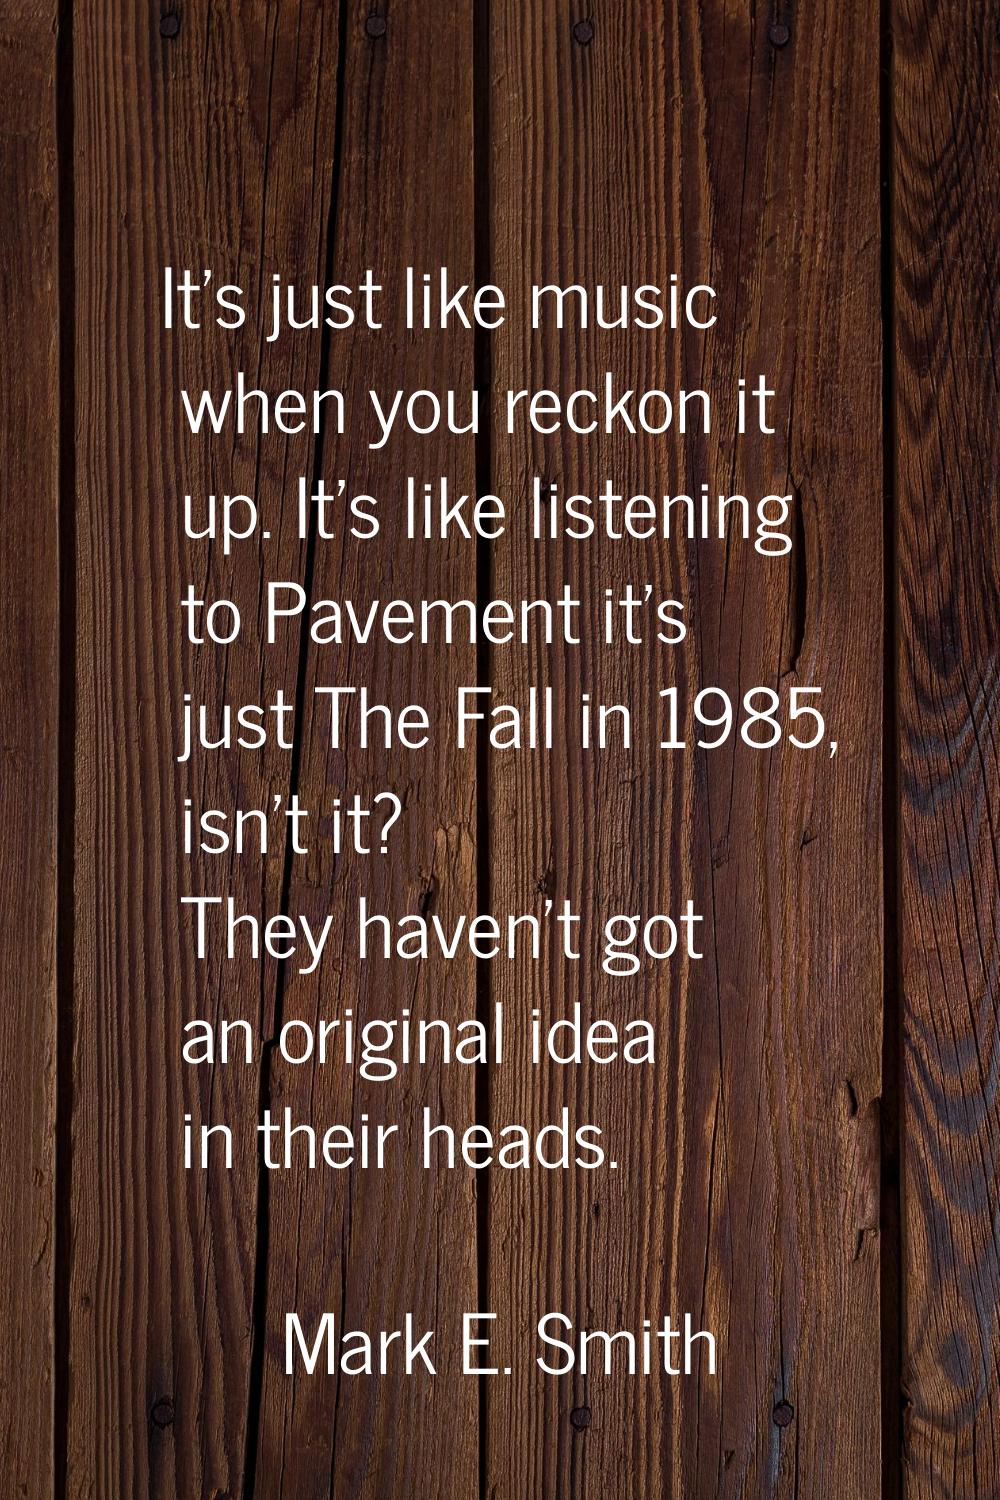 It's just like music when you reckon it up. It's like listening to Pavement it's just The Fall in 1